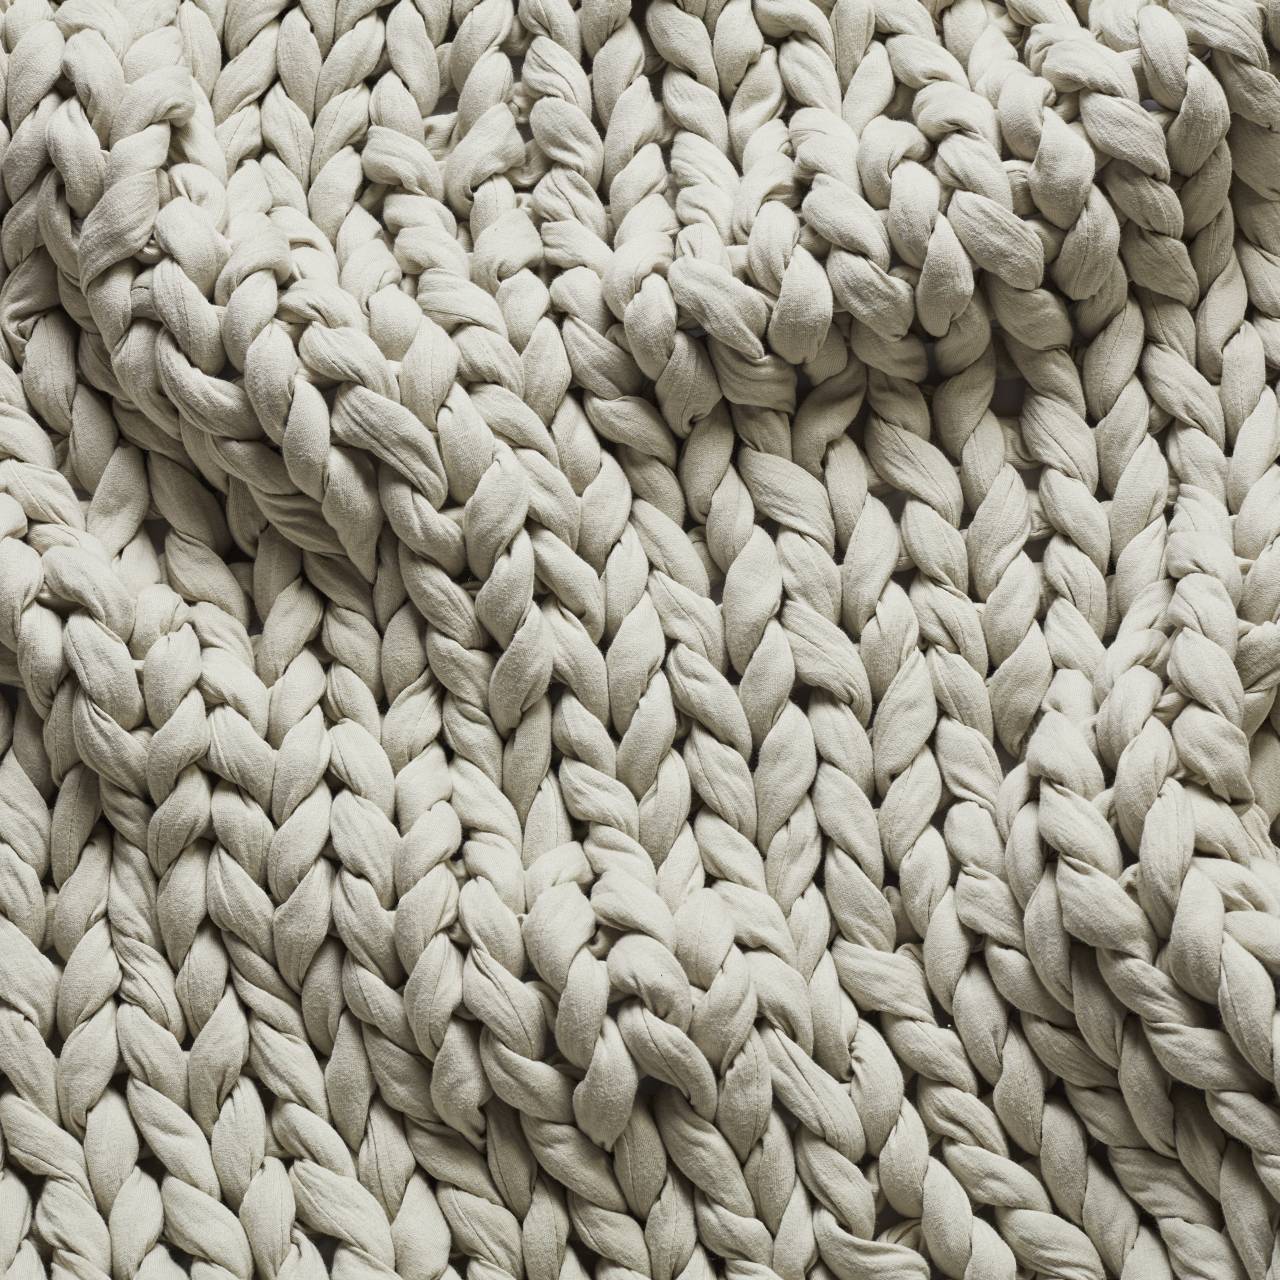 Hand Knitted Weighted Blanket Image 3